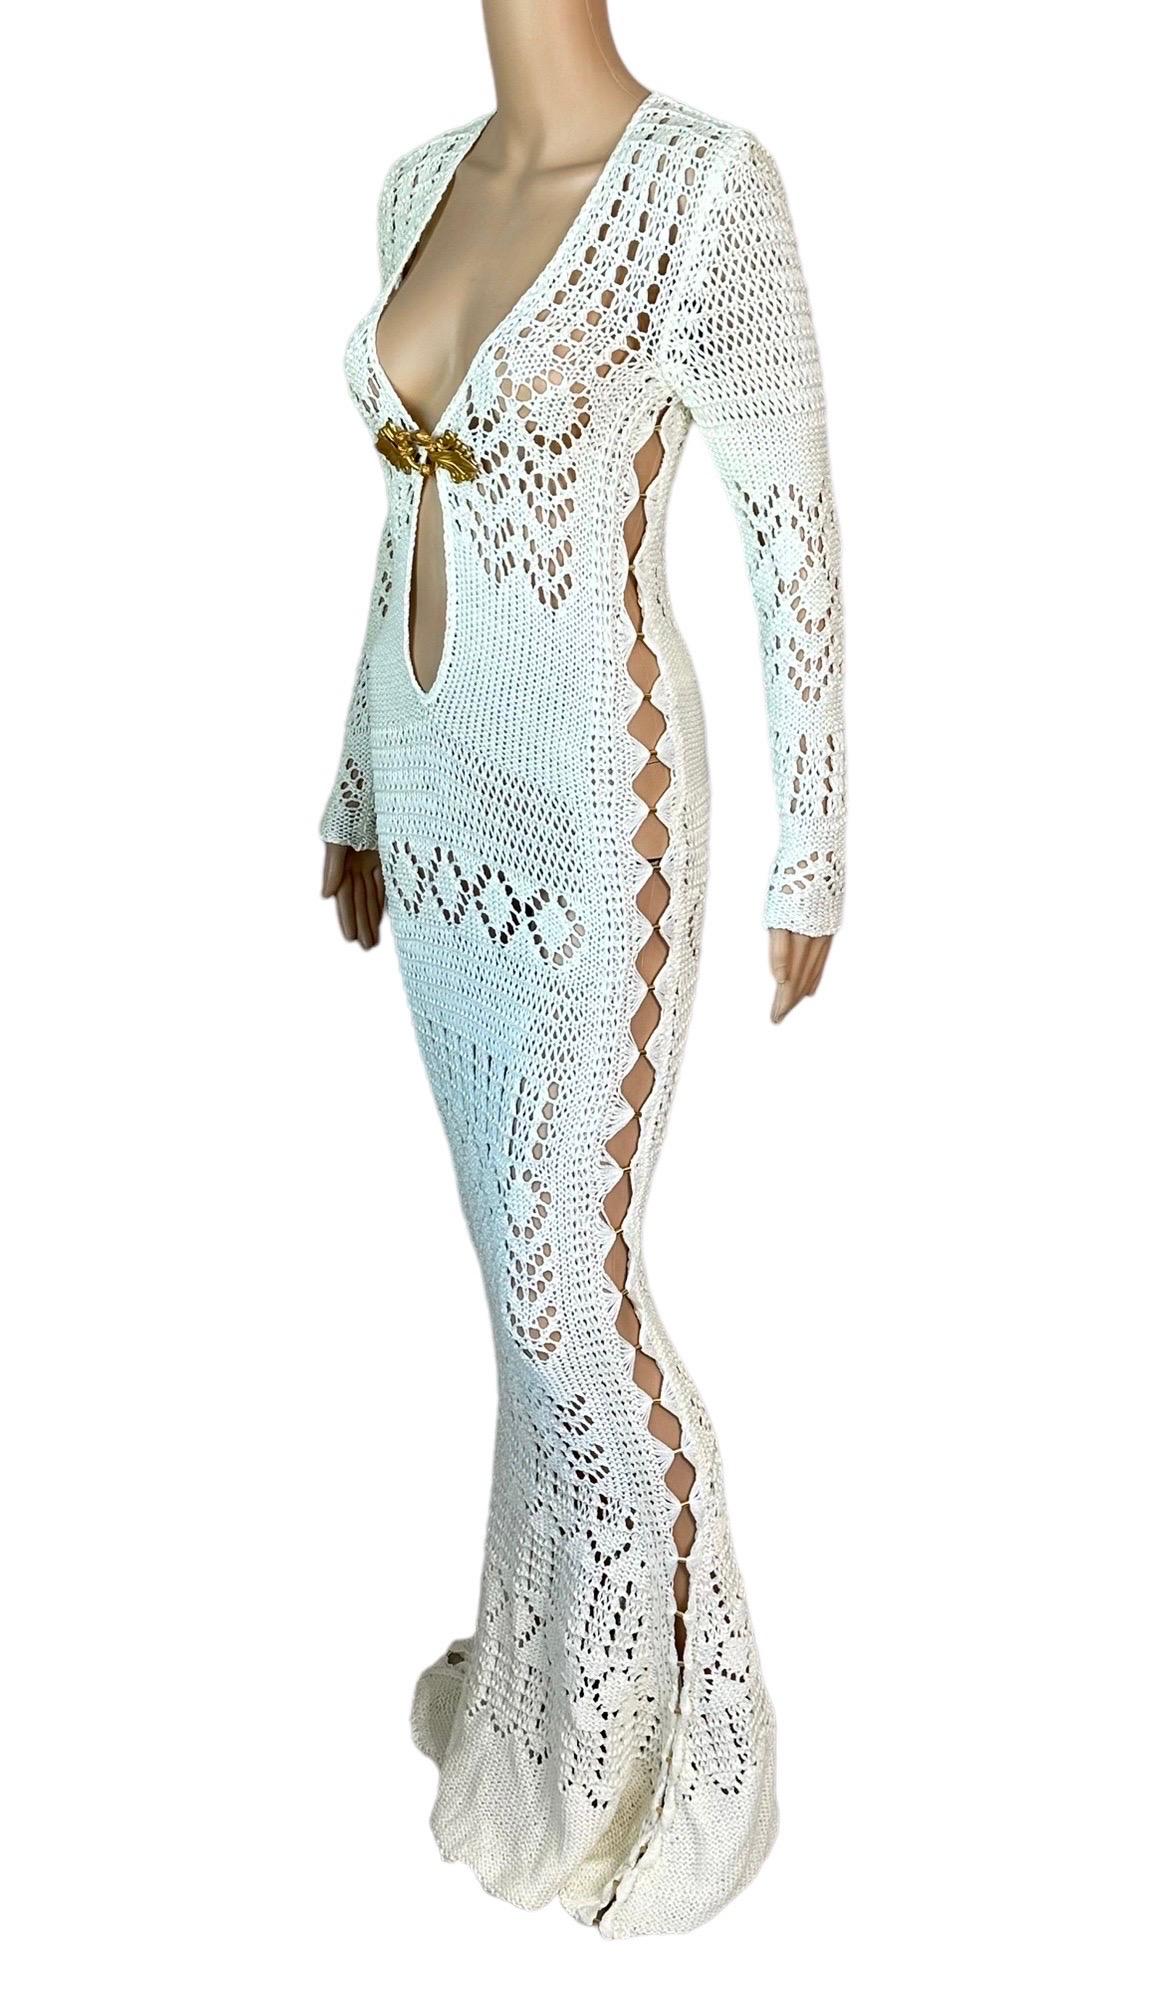 Emilio Pucci S/S 2011 Runway Unworn Embellished Cutout Crochet Open Knit Dress  In New Condition For Sale In Naples, FL